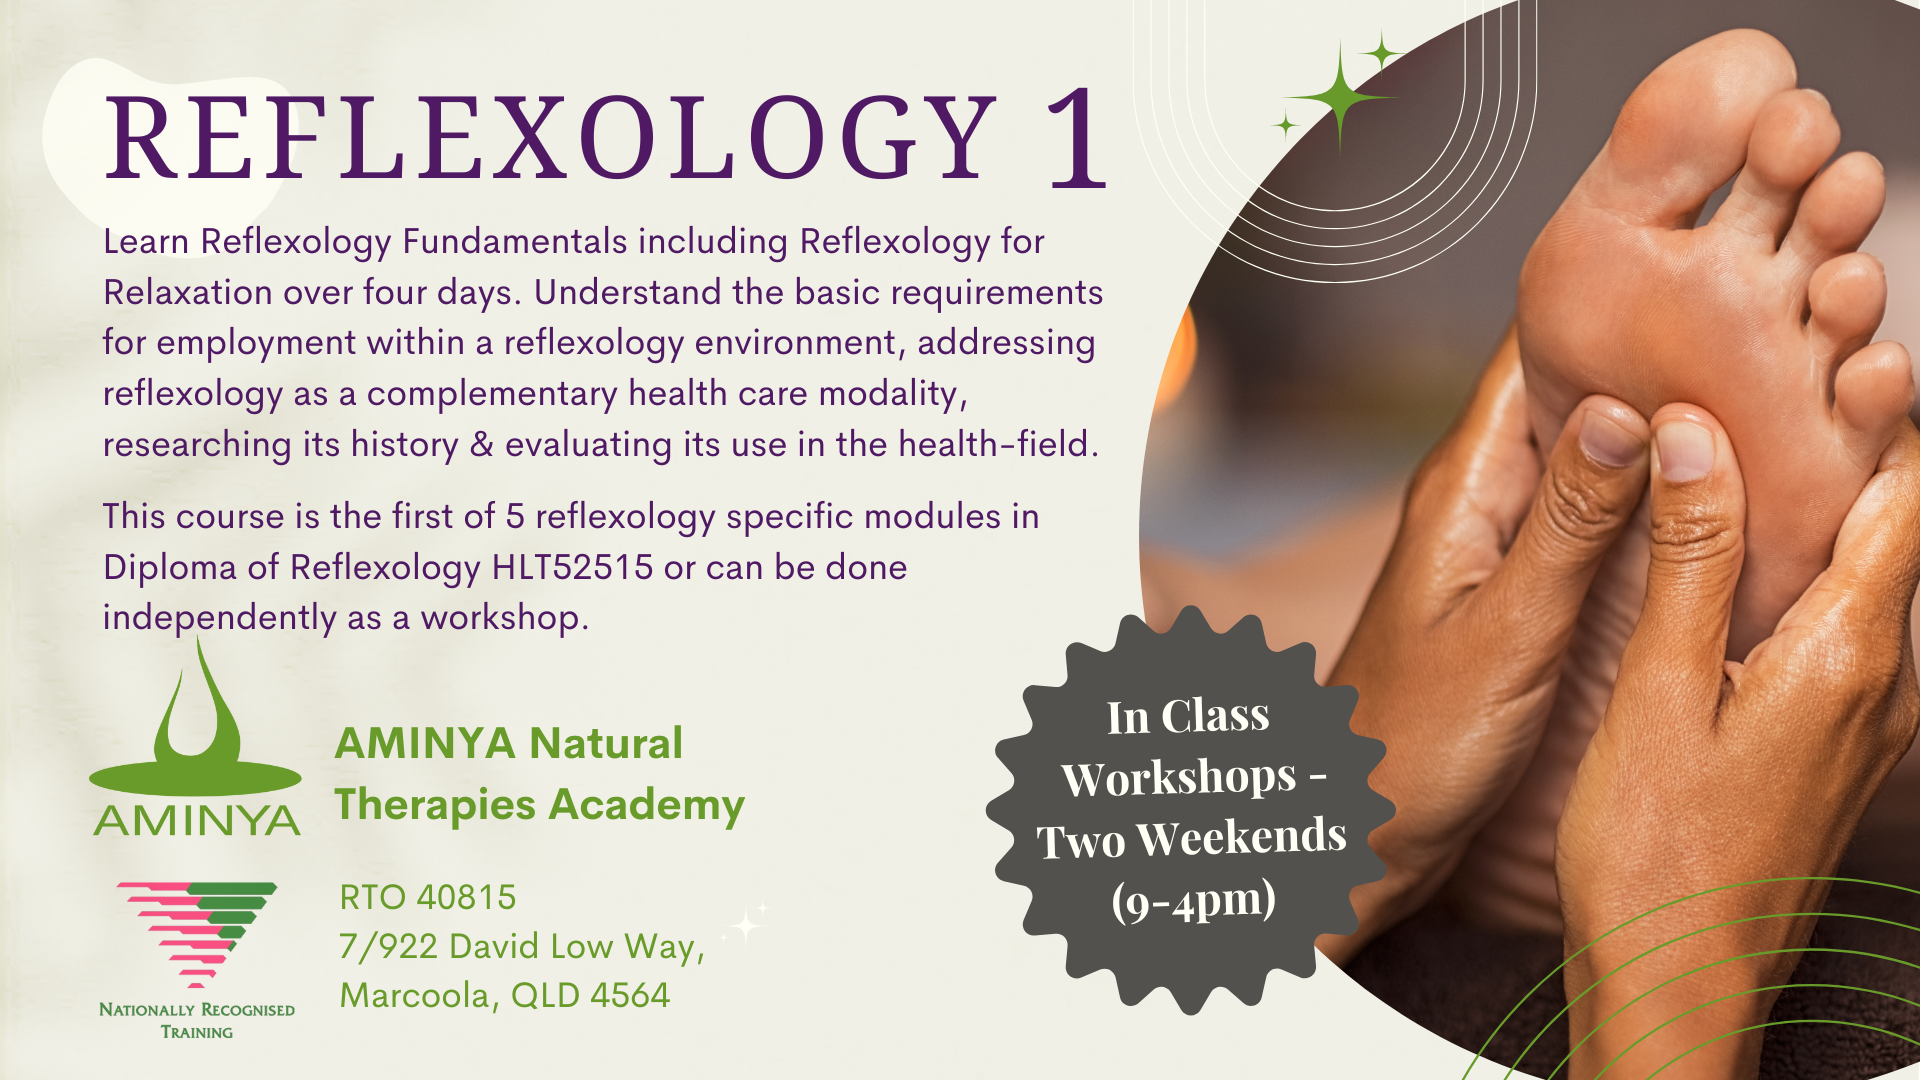 Learn Reflexology | Accredited Course